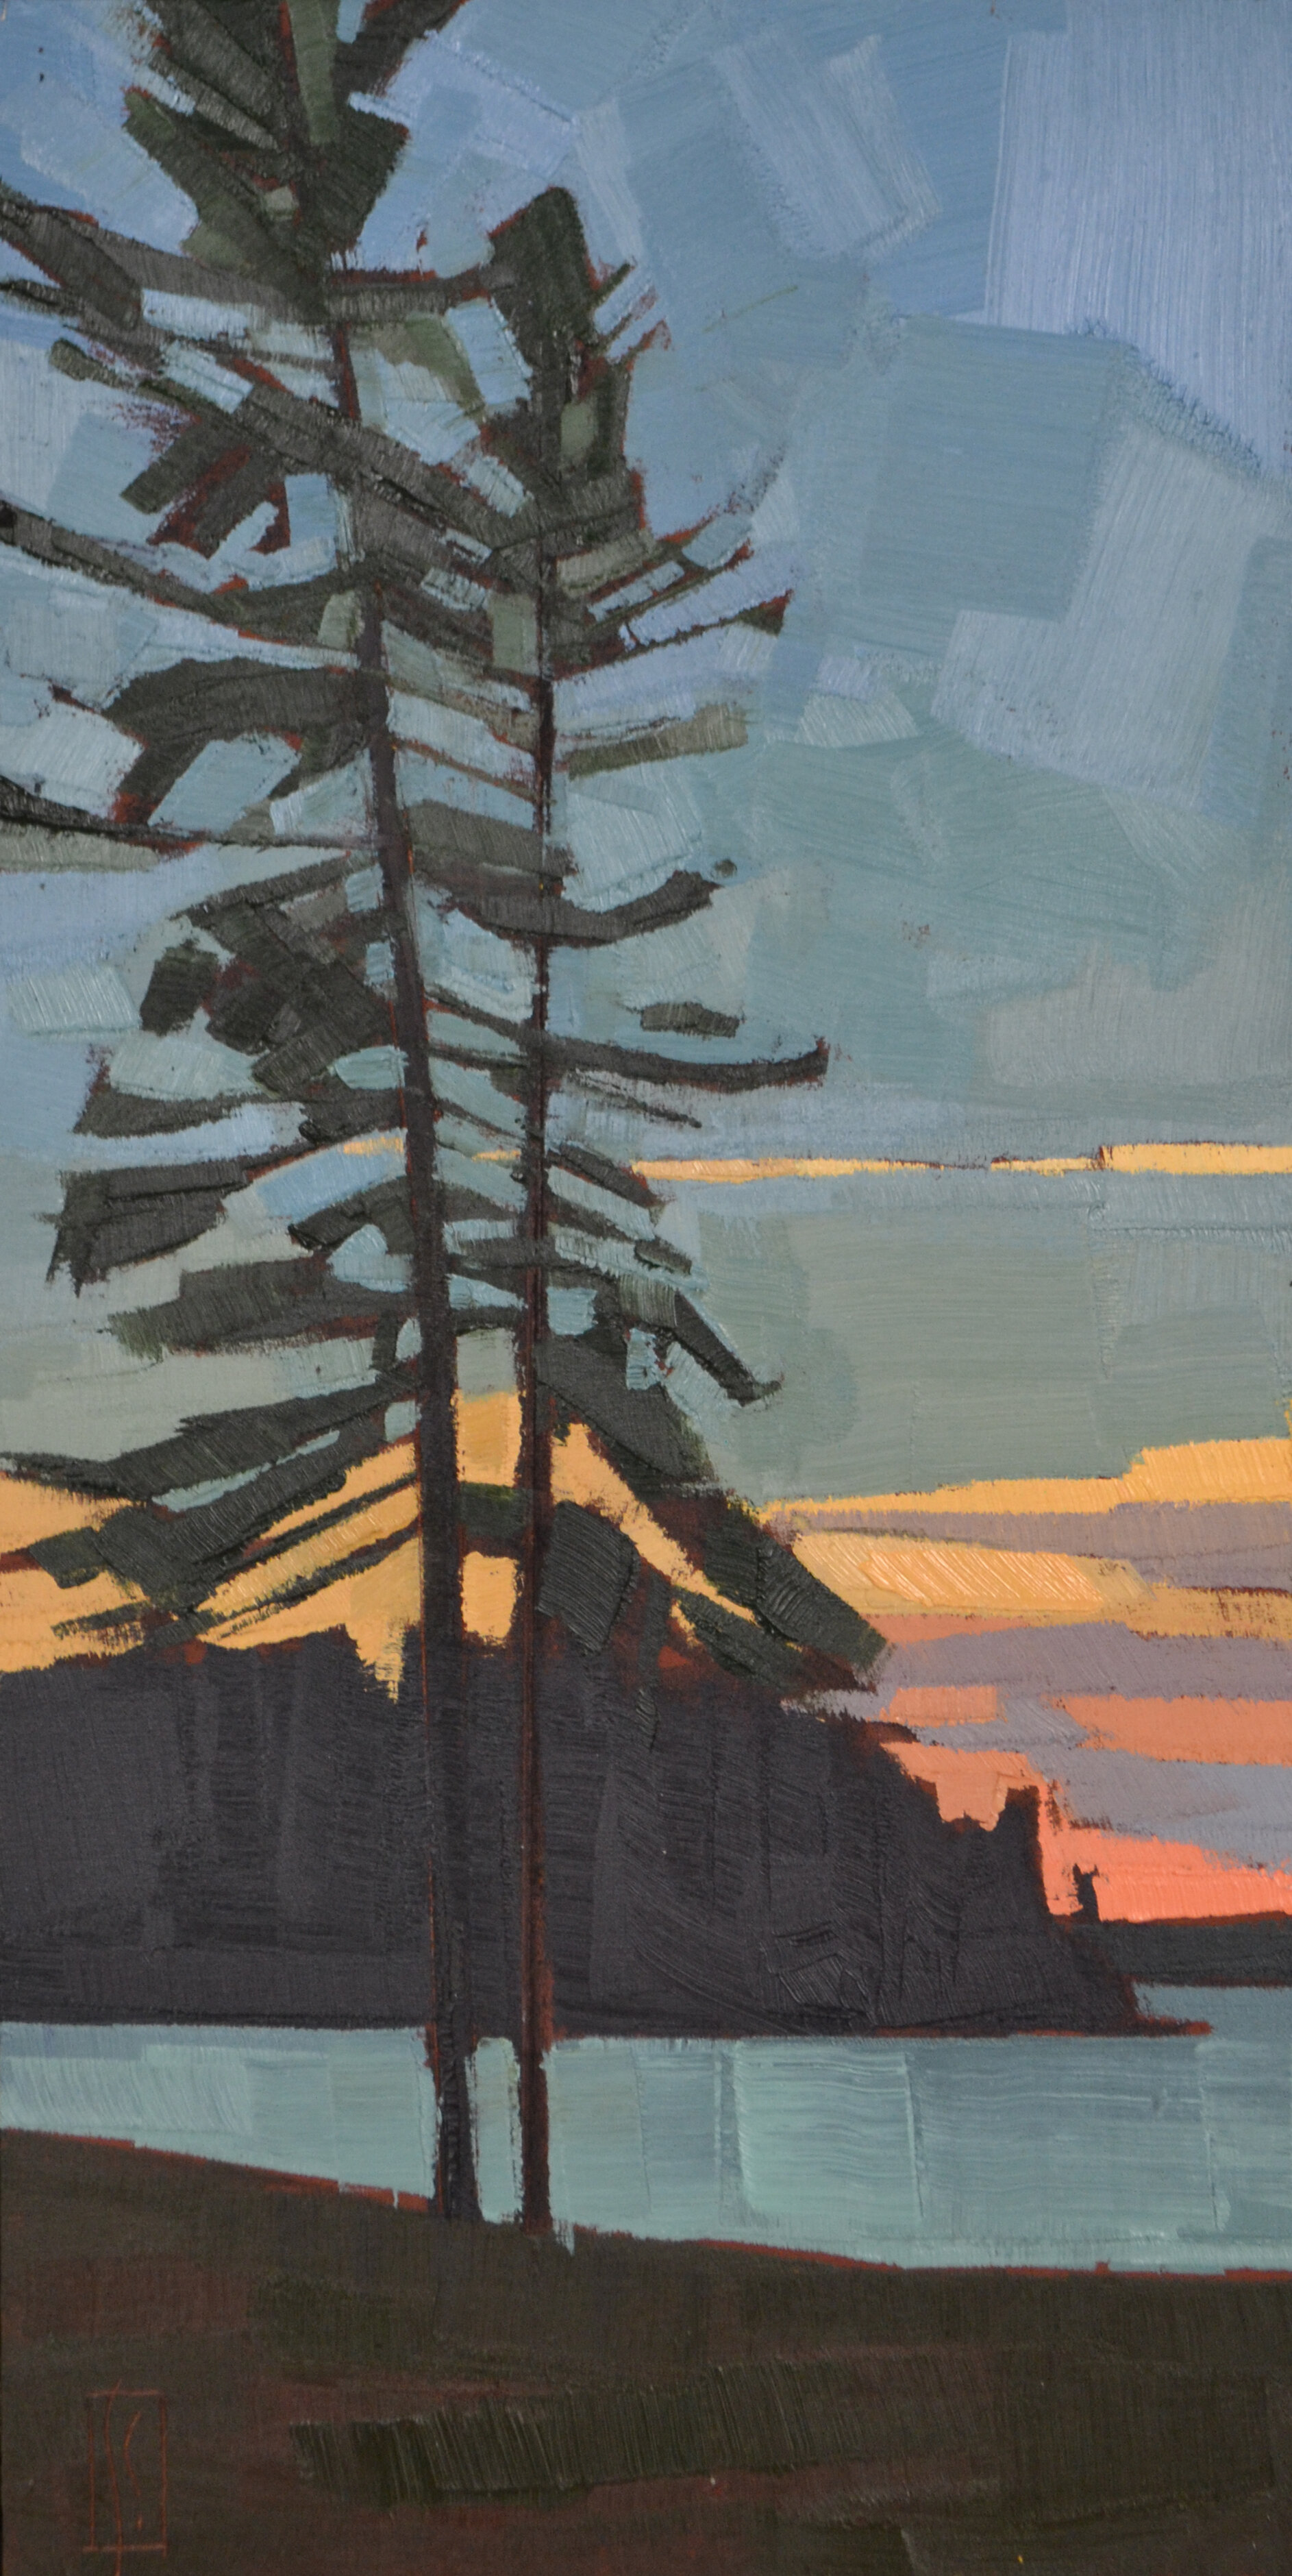   Two Pines  6 x 12 oil on cradled wood panel Islesford Artists Gallery  sold 